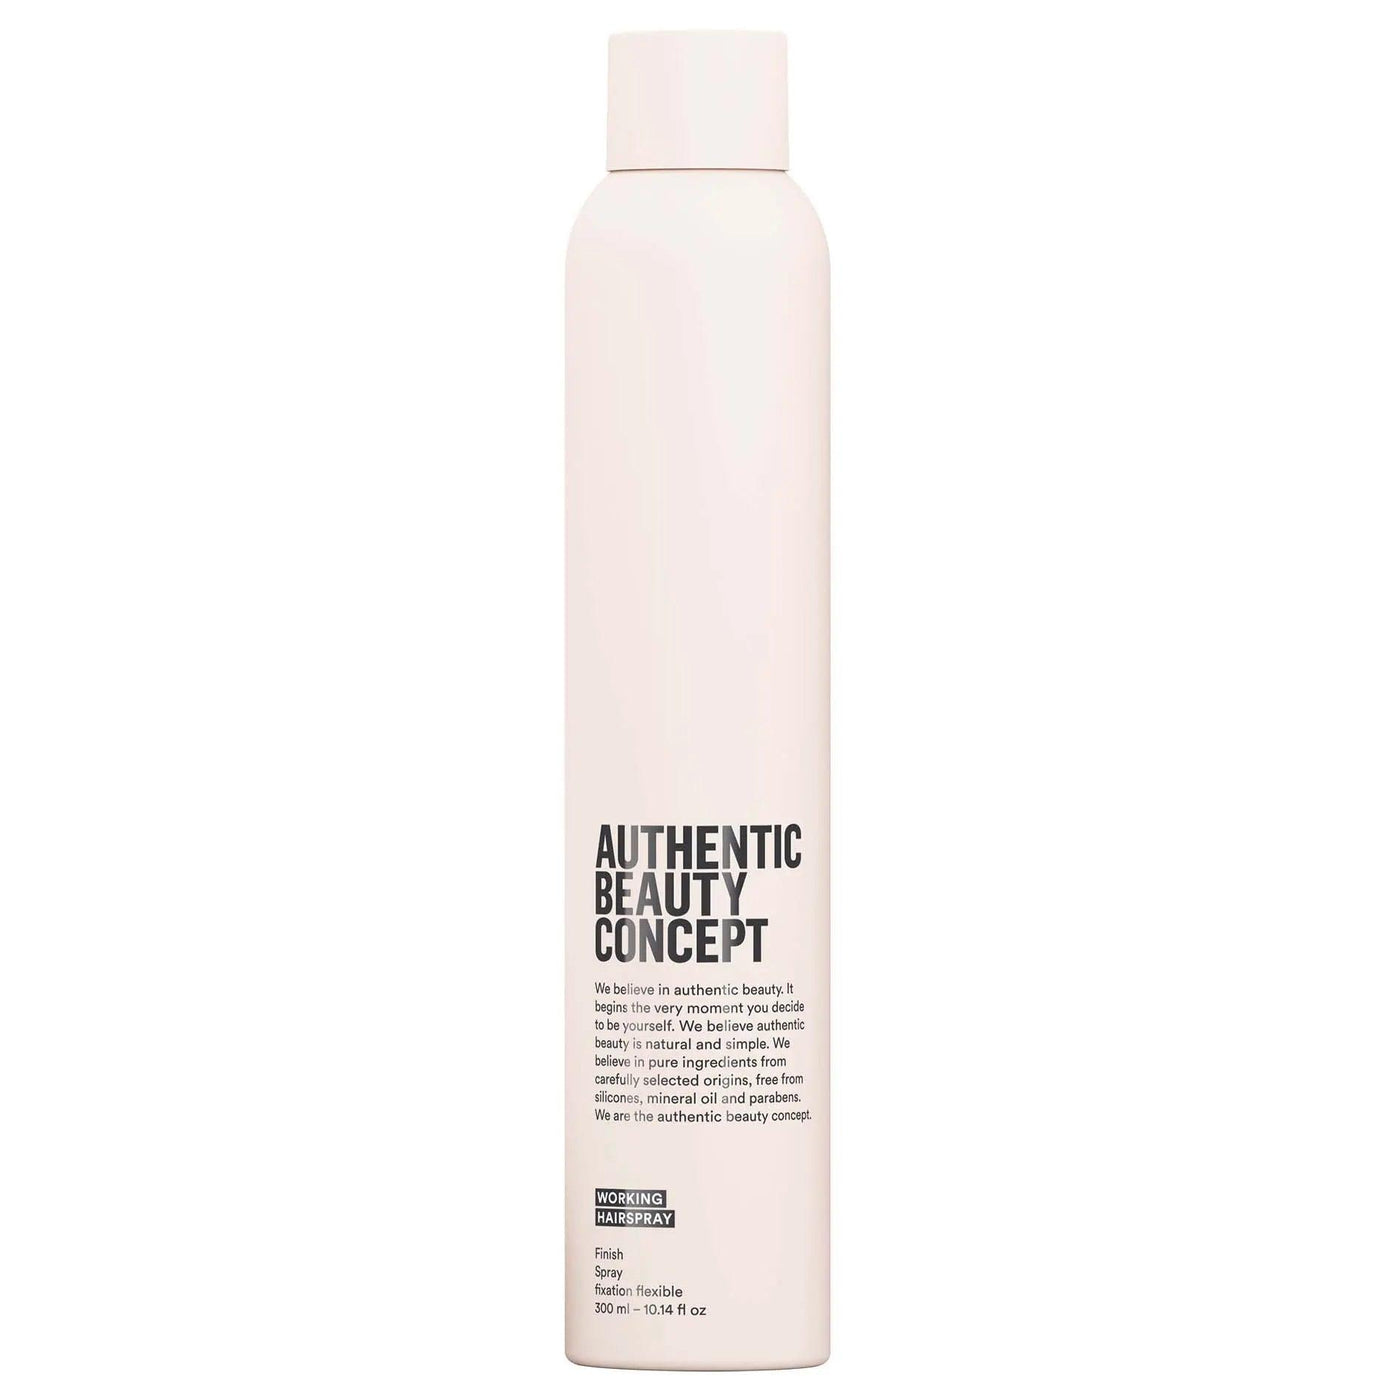 WORKING HAIRSPRAY 300ML Authentic Beauty Concept Boutique Deauville